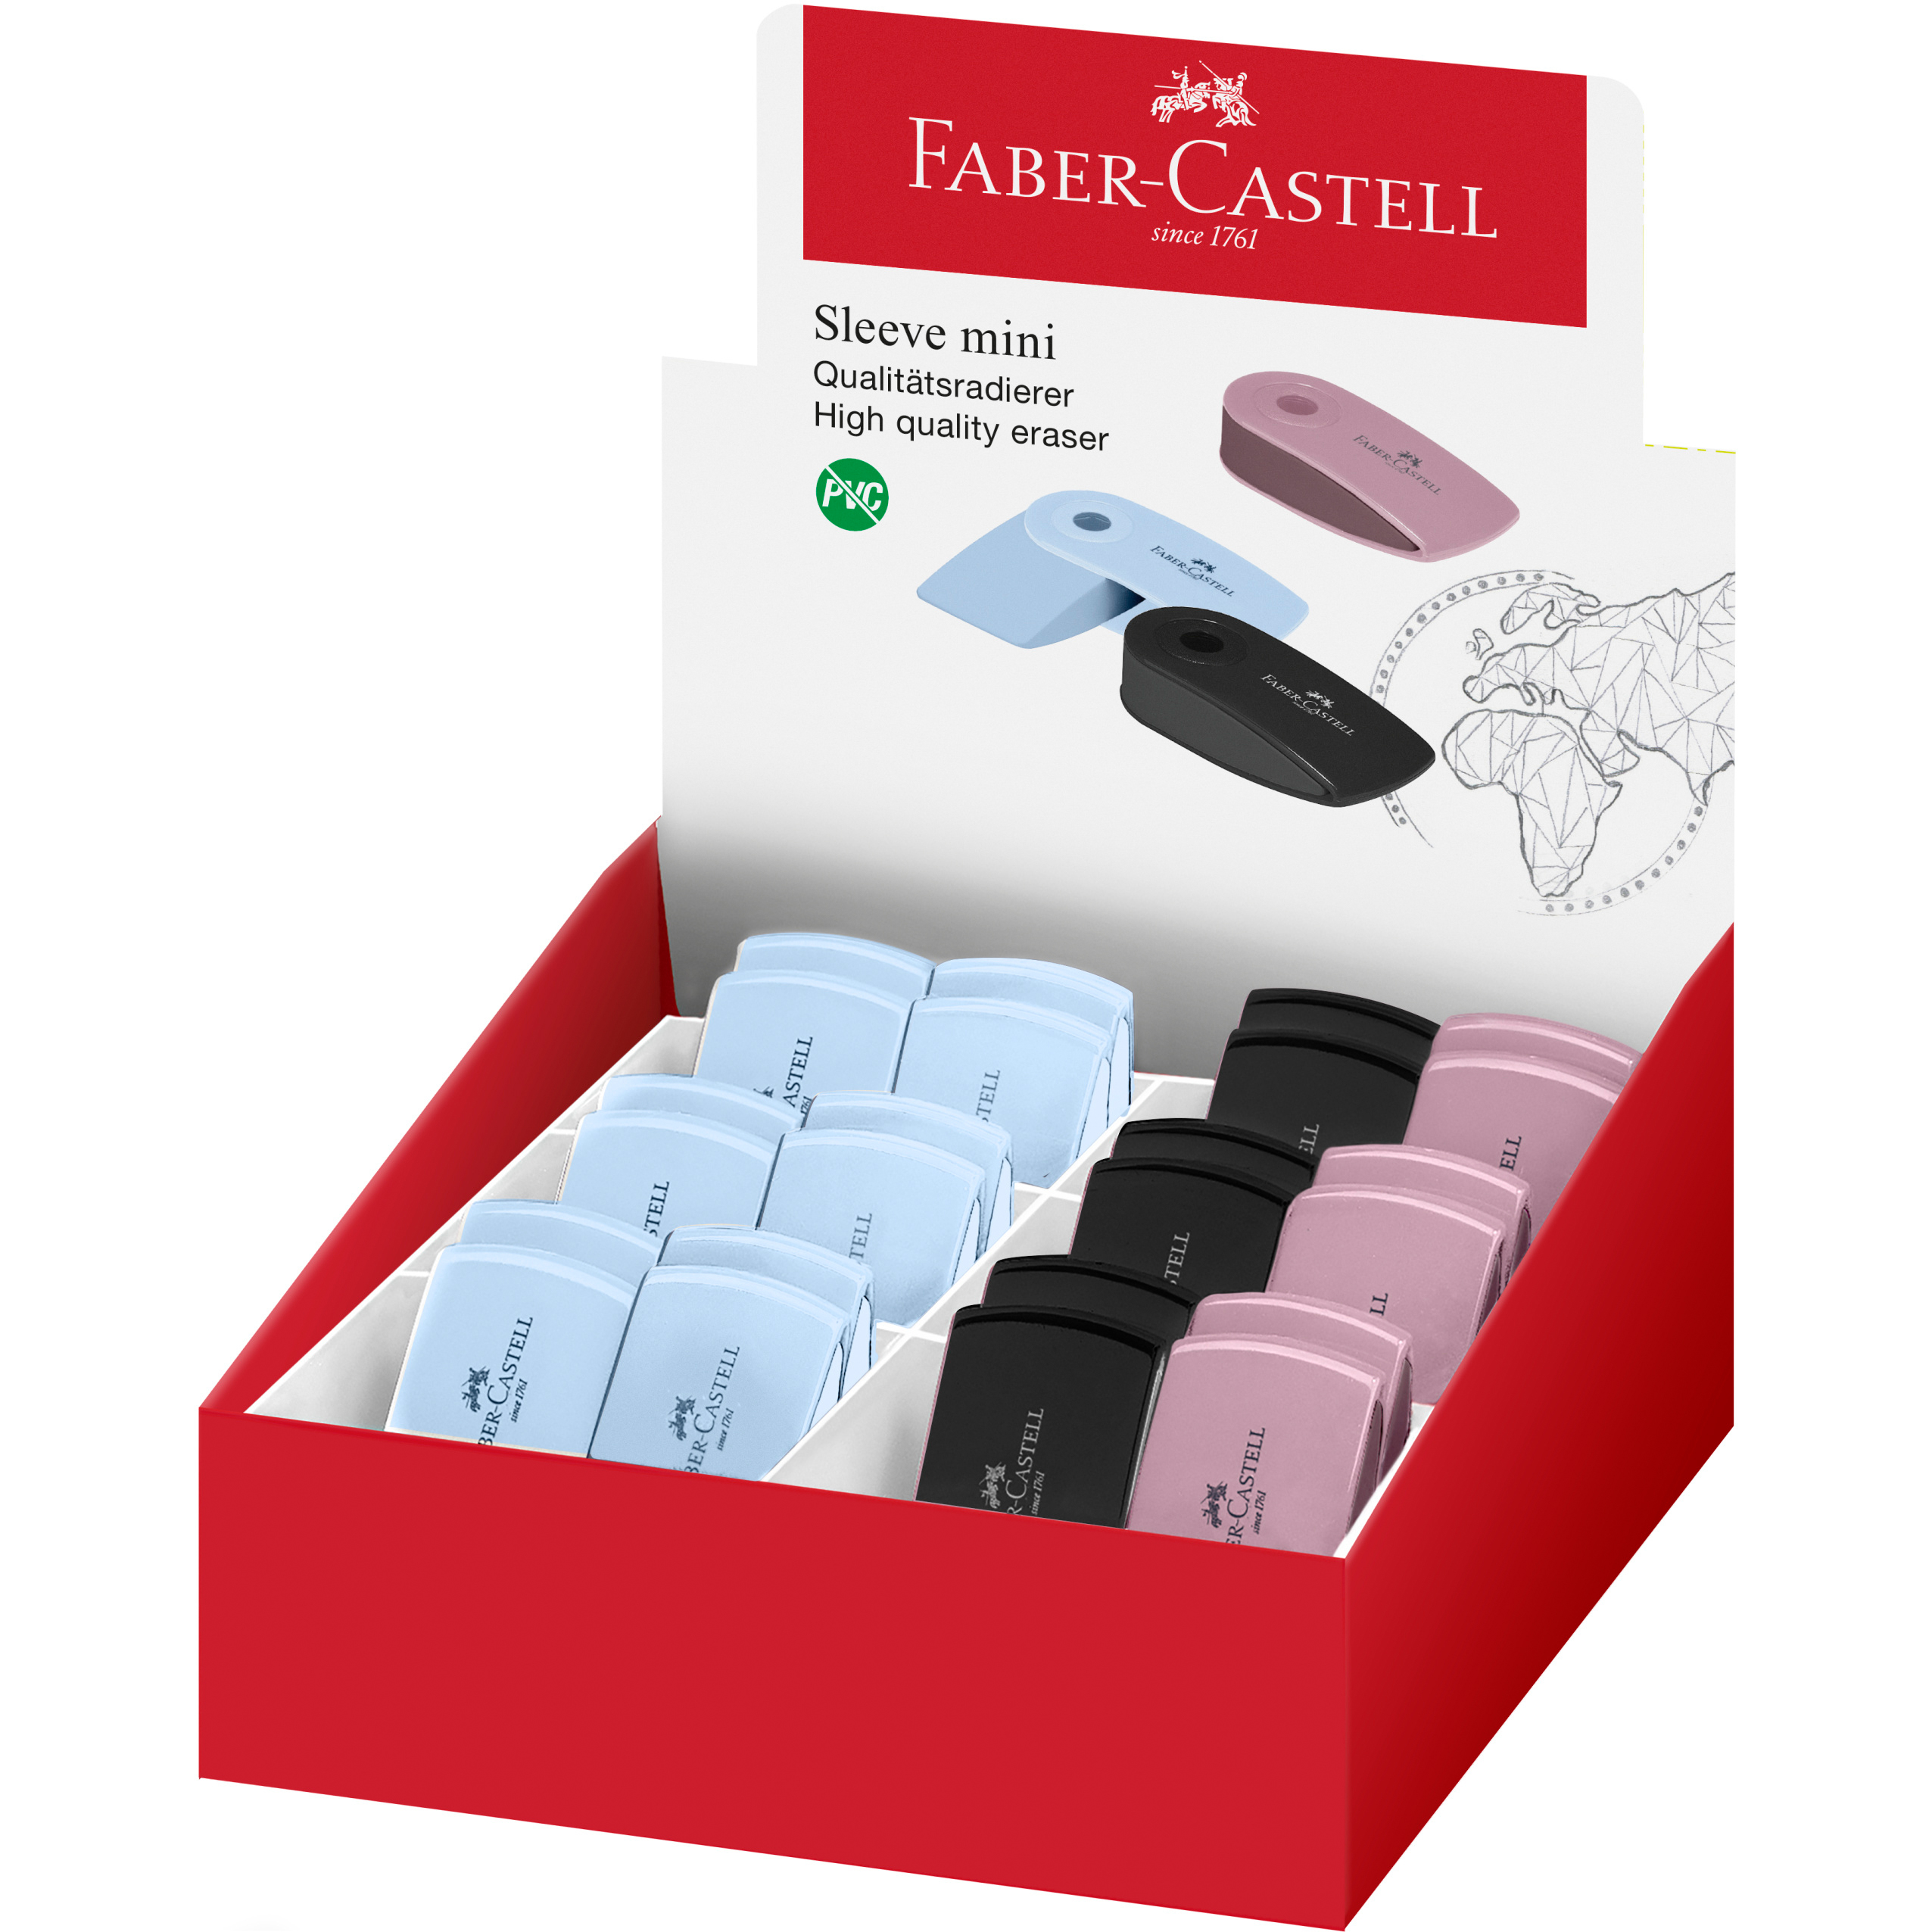 FABER-CASTELL Gomme Sleeve Mini 182477 assortis